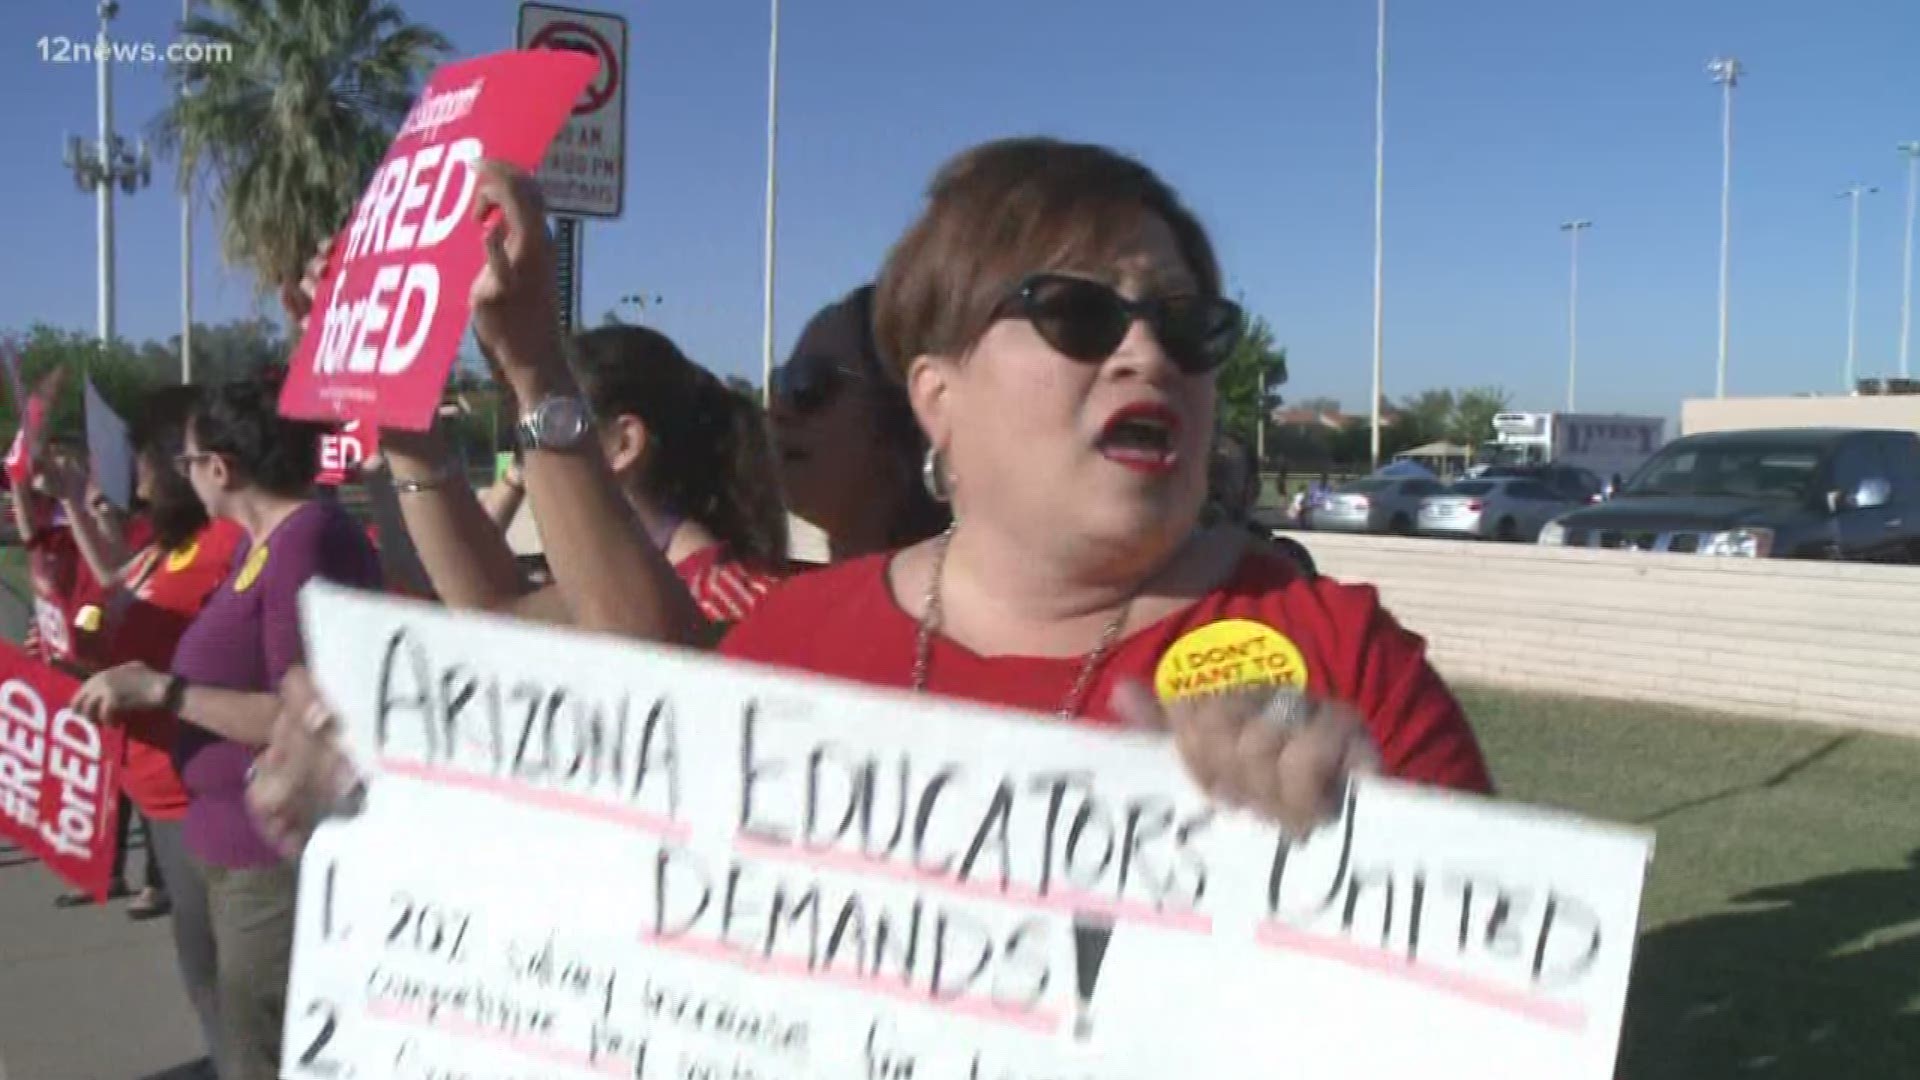 Outside of Mitchell Elementary in the West Valley about 30 teachers chant, hold #RedForEd signs and walk-in hoping their efforts lead to more pay and more money for schools.